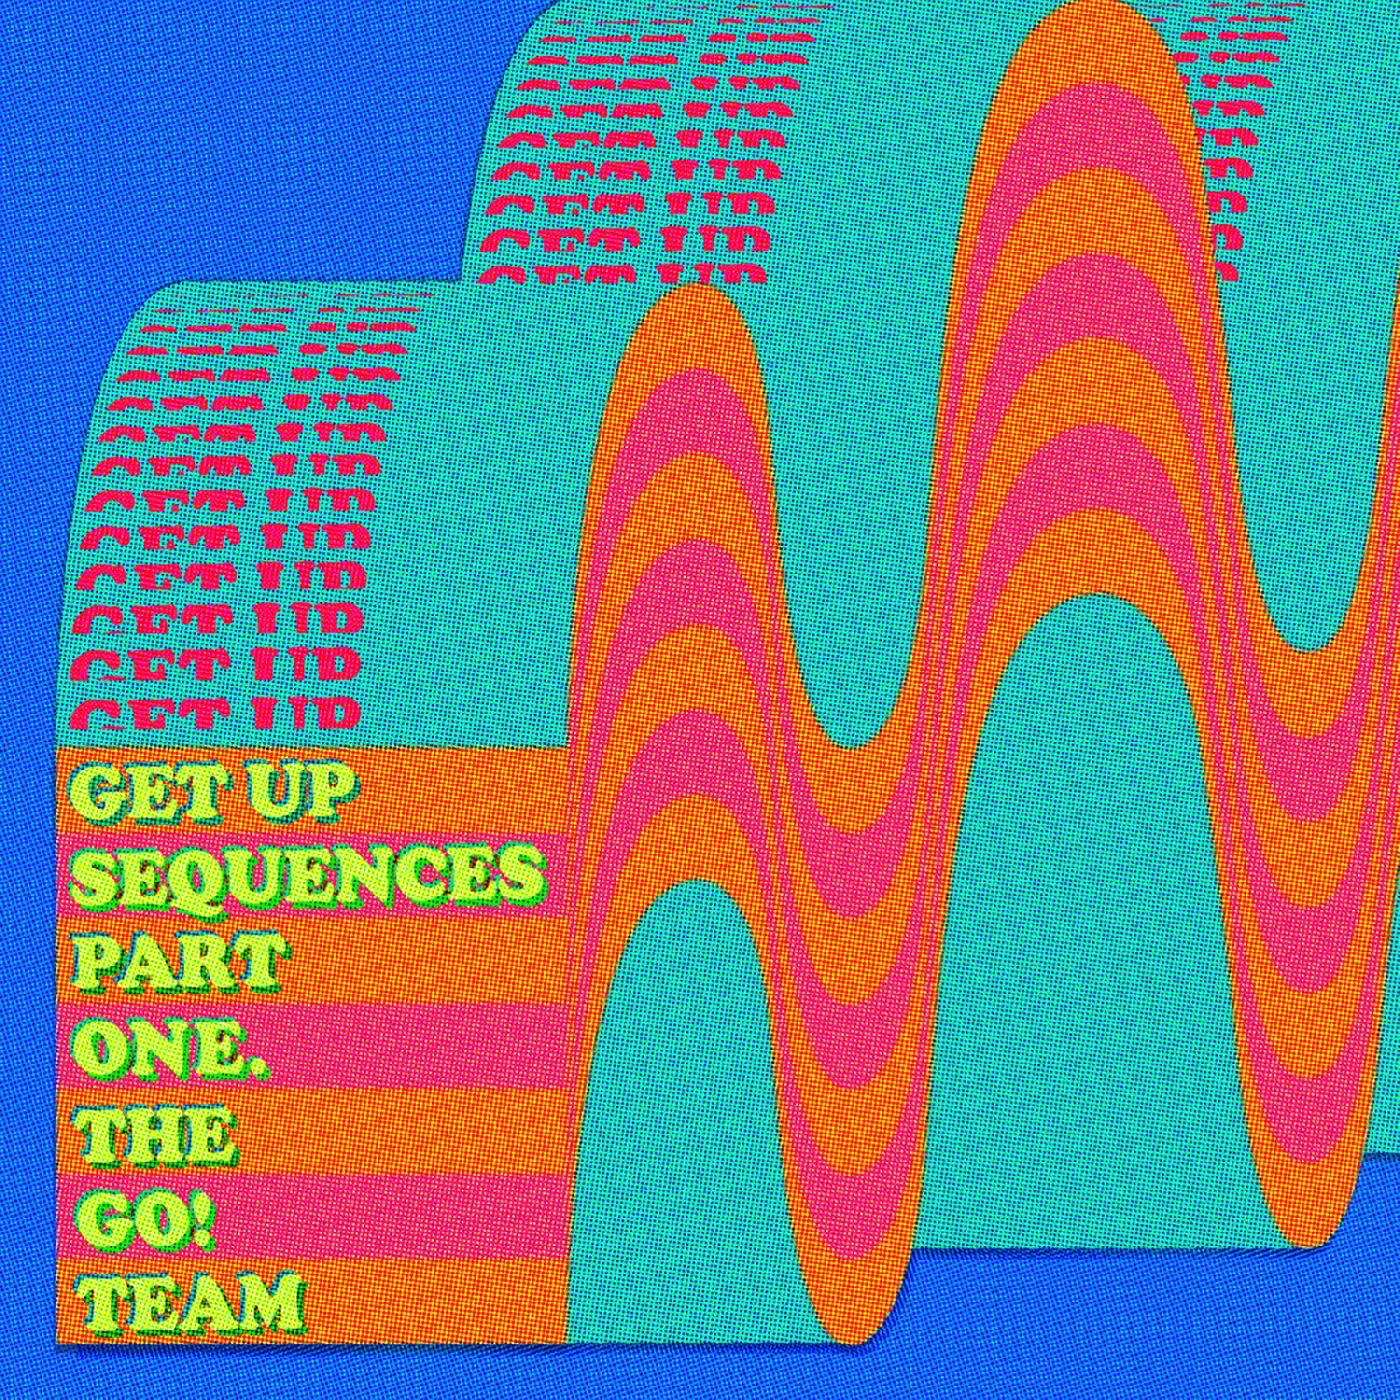 <strong>The Go! Team - Get Up Sequences Part One</strong> (Vinyl LP - turquoise)